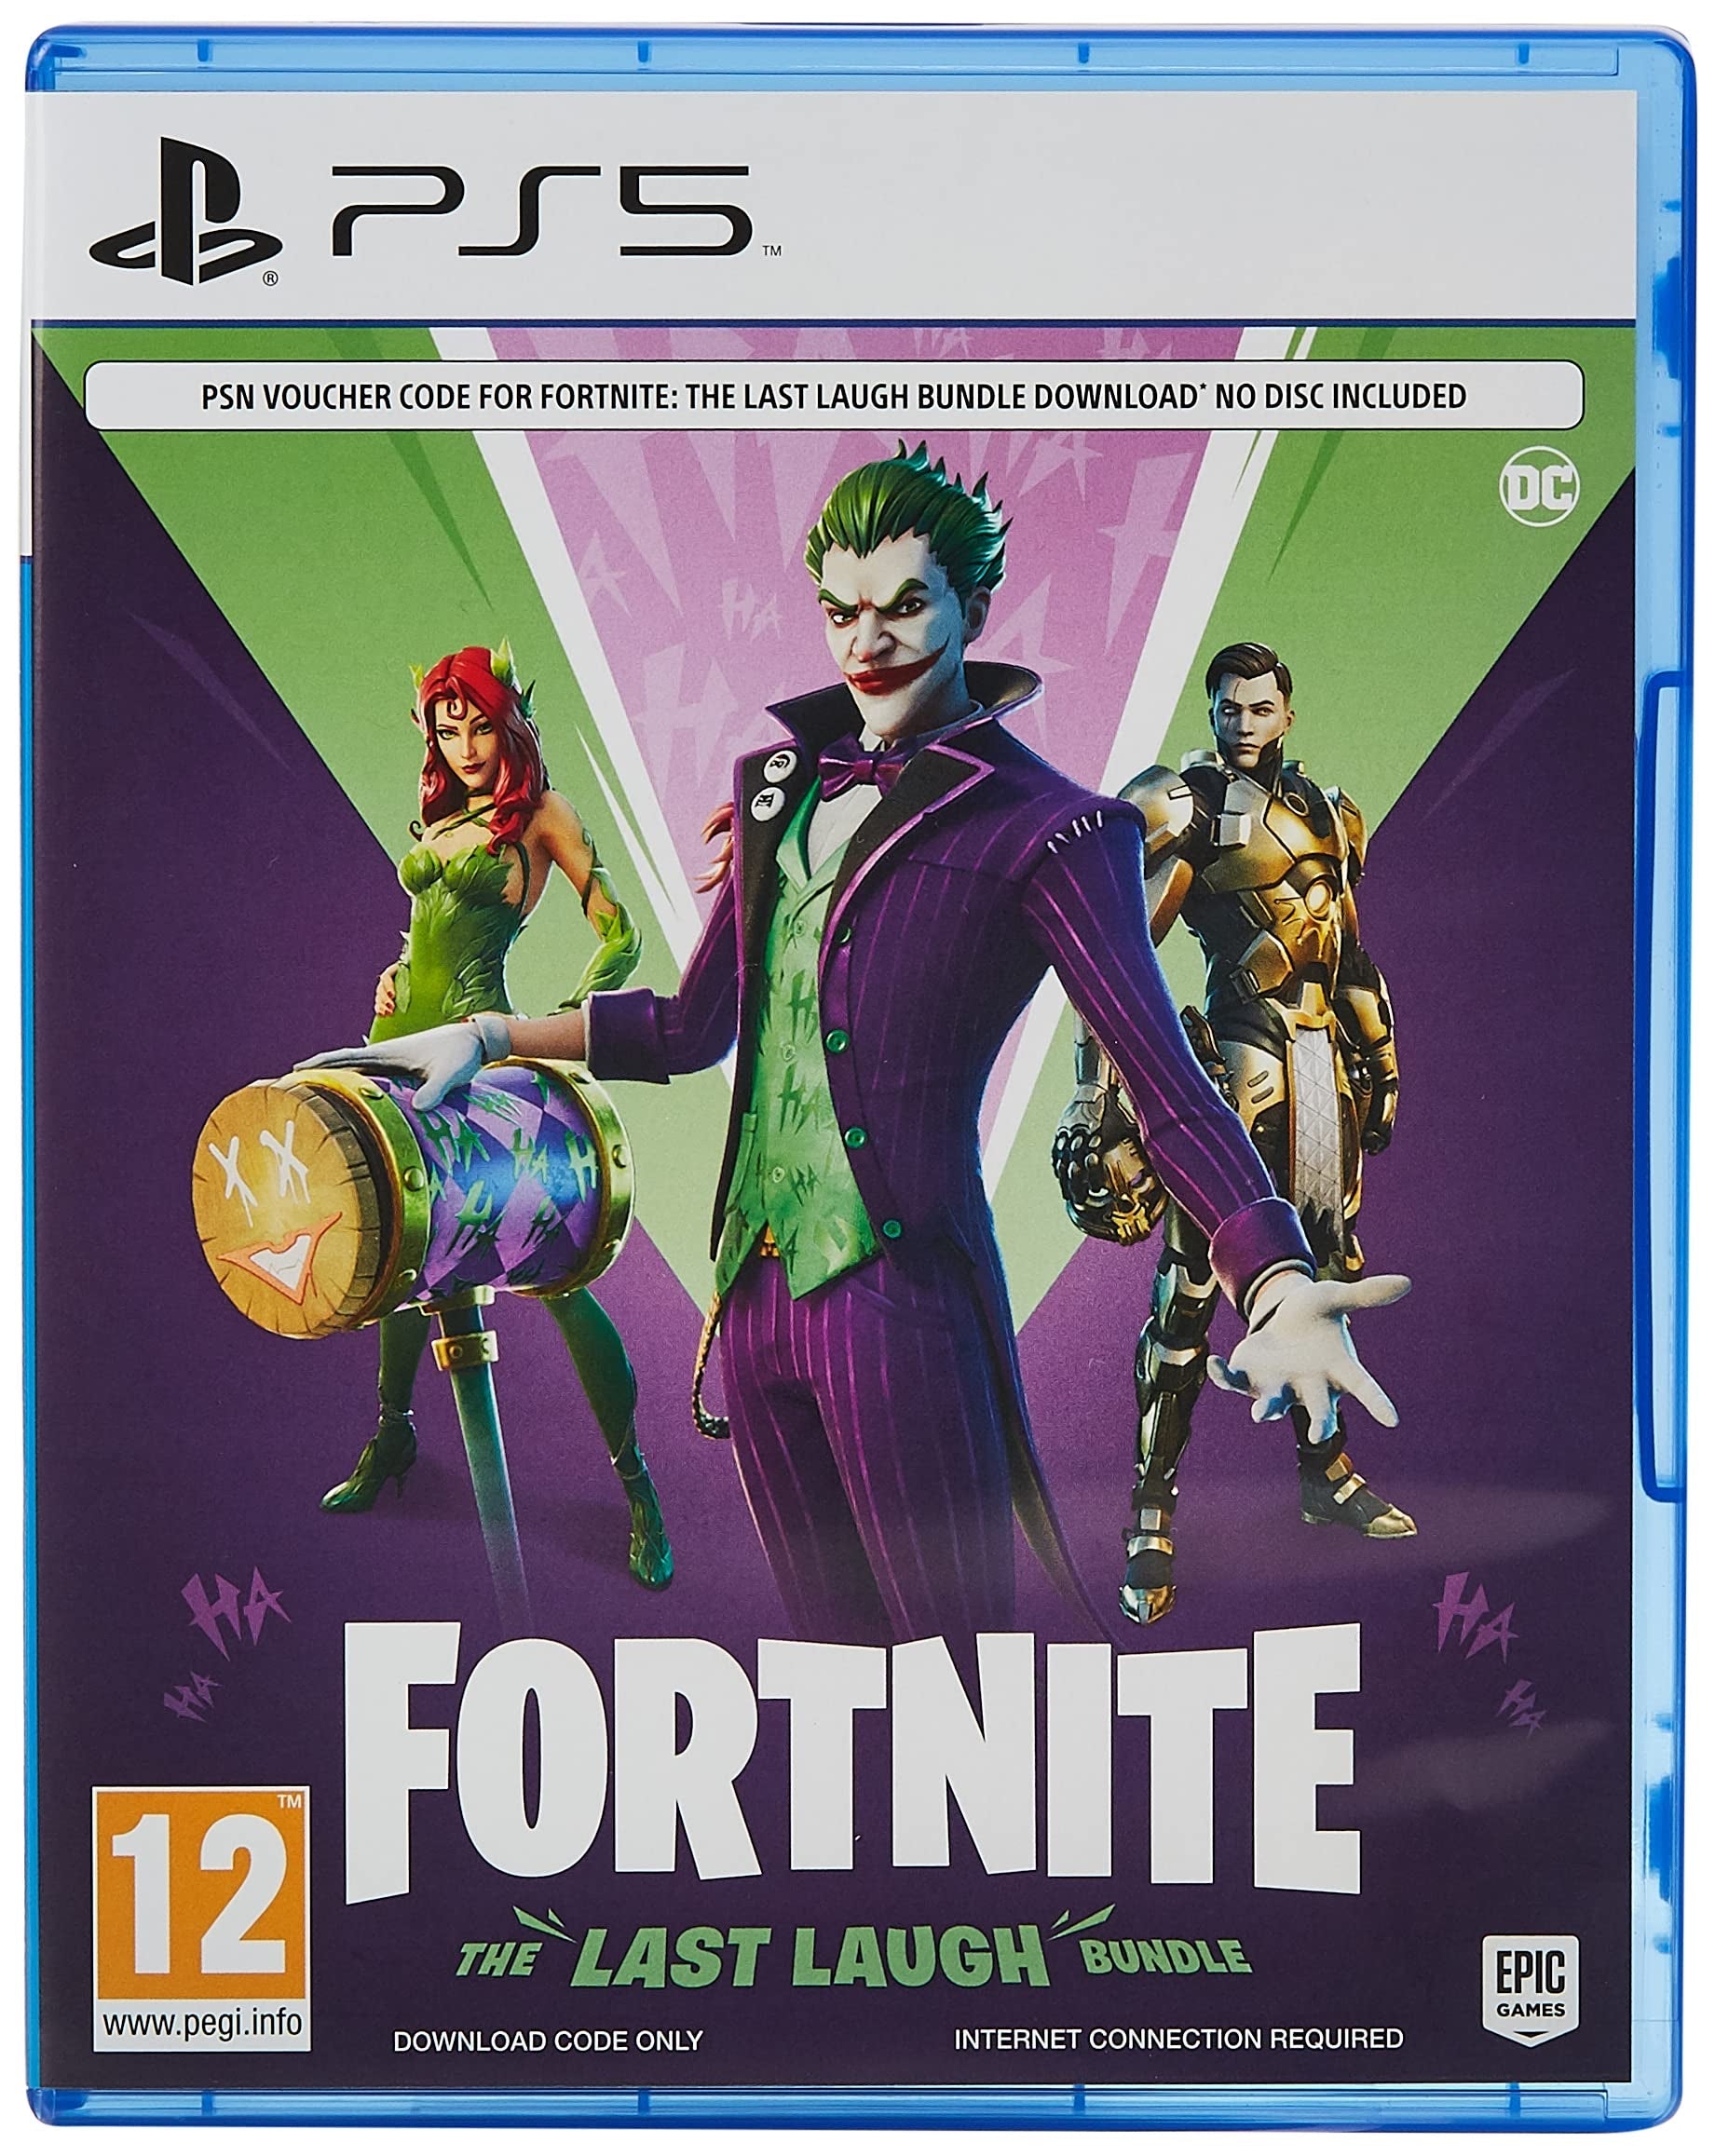 PS5 FORTNITE video game